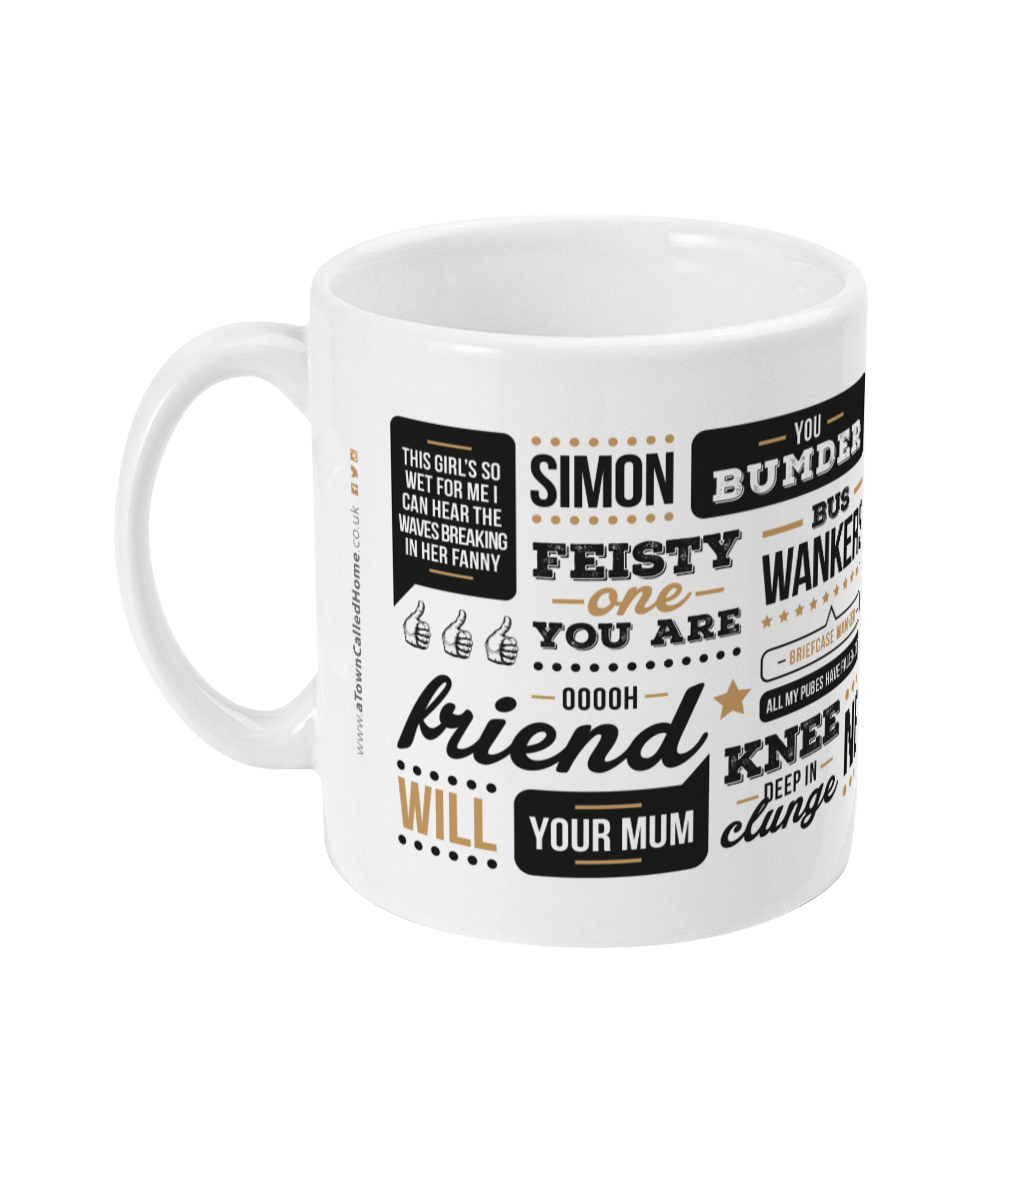 Channel 4 tv show presents & gifts, hilarious the inbetweeners themed coffee cup mug with the funniest quotes and one liners from main characters jay, will, simon & neil. Classics such as bus wankers, clunge mobile, completed it mate, you bummed